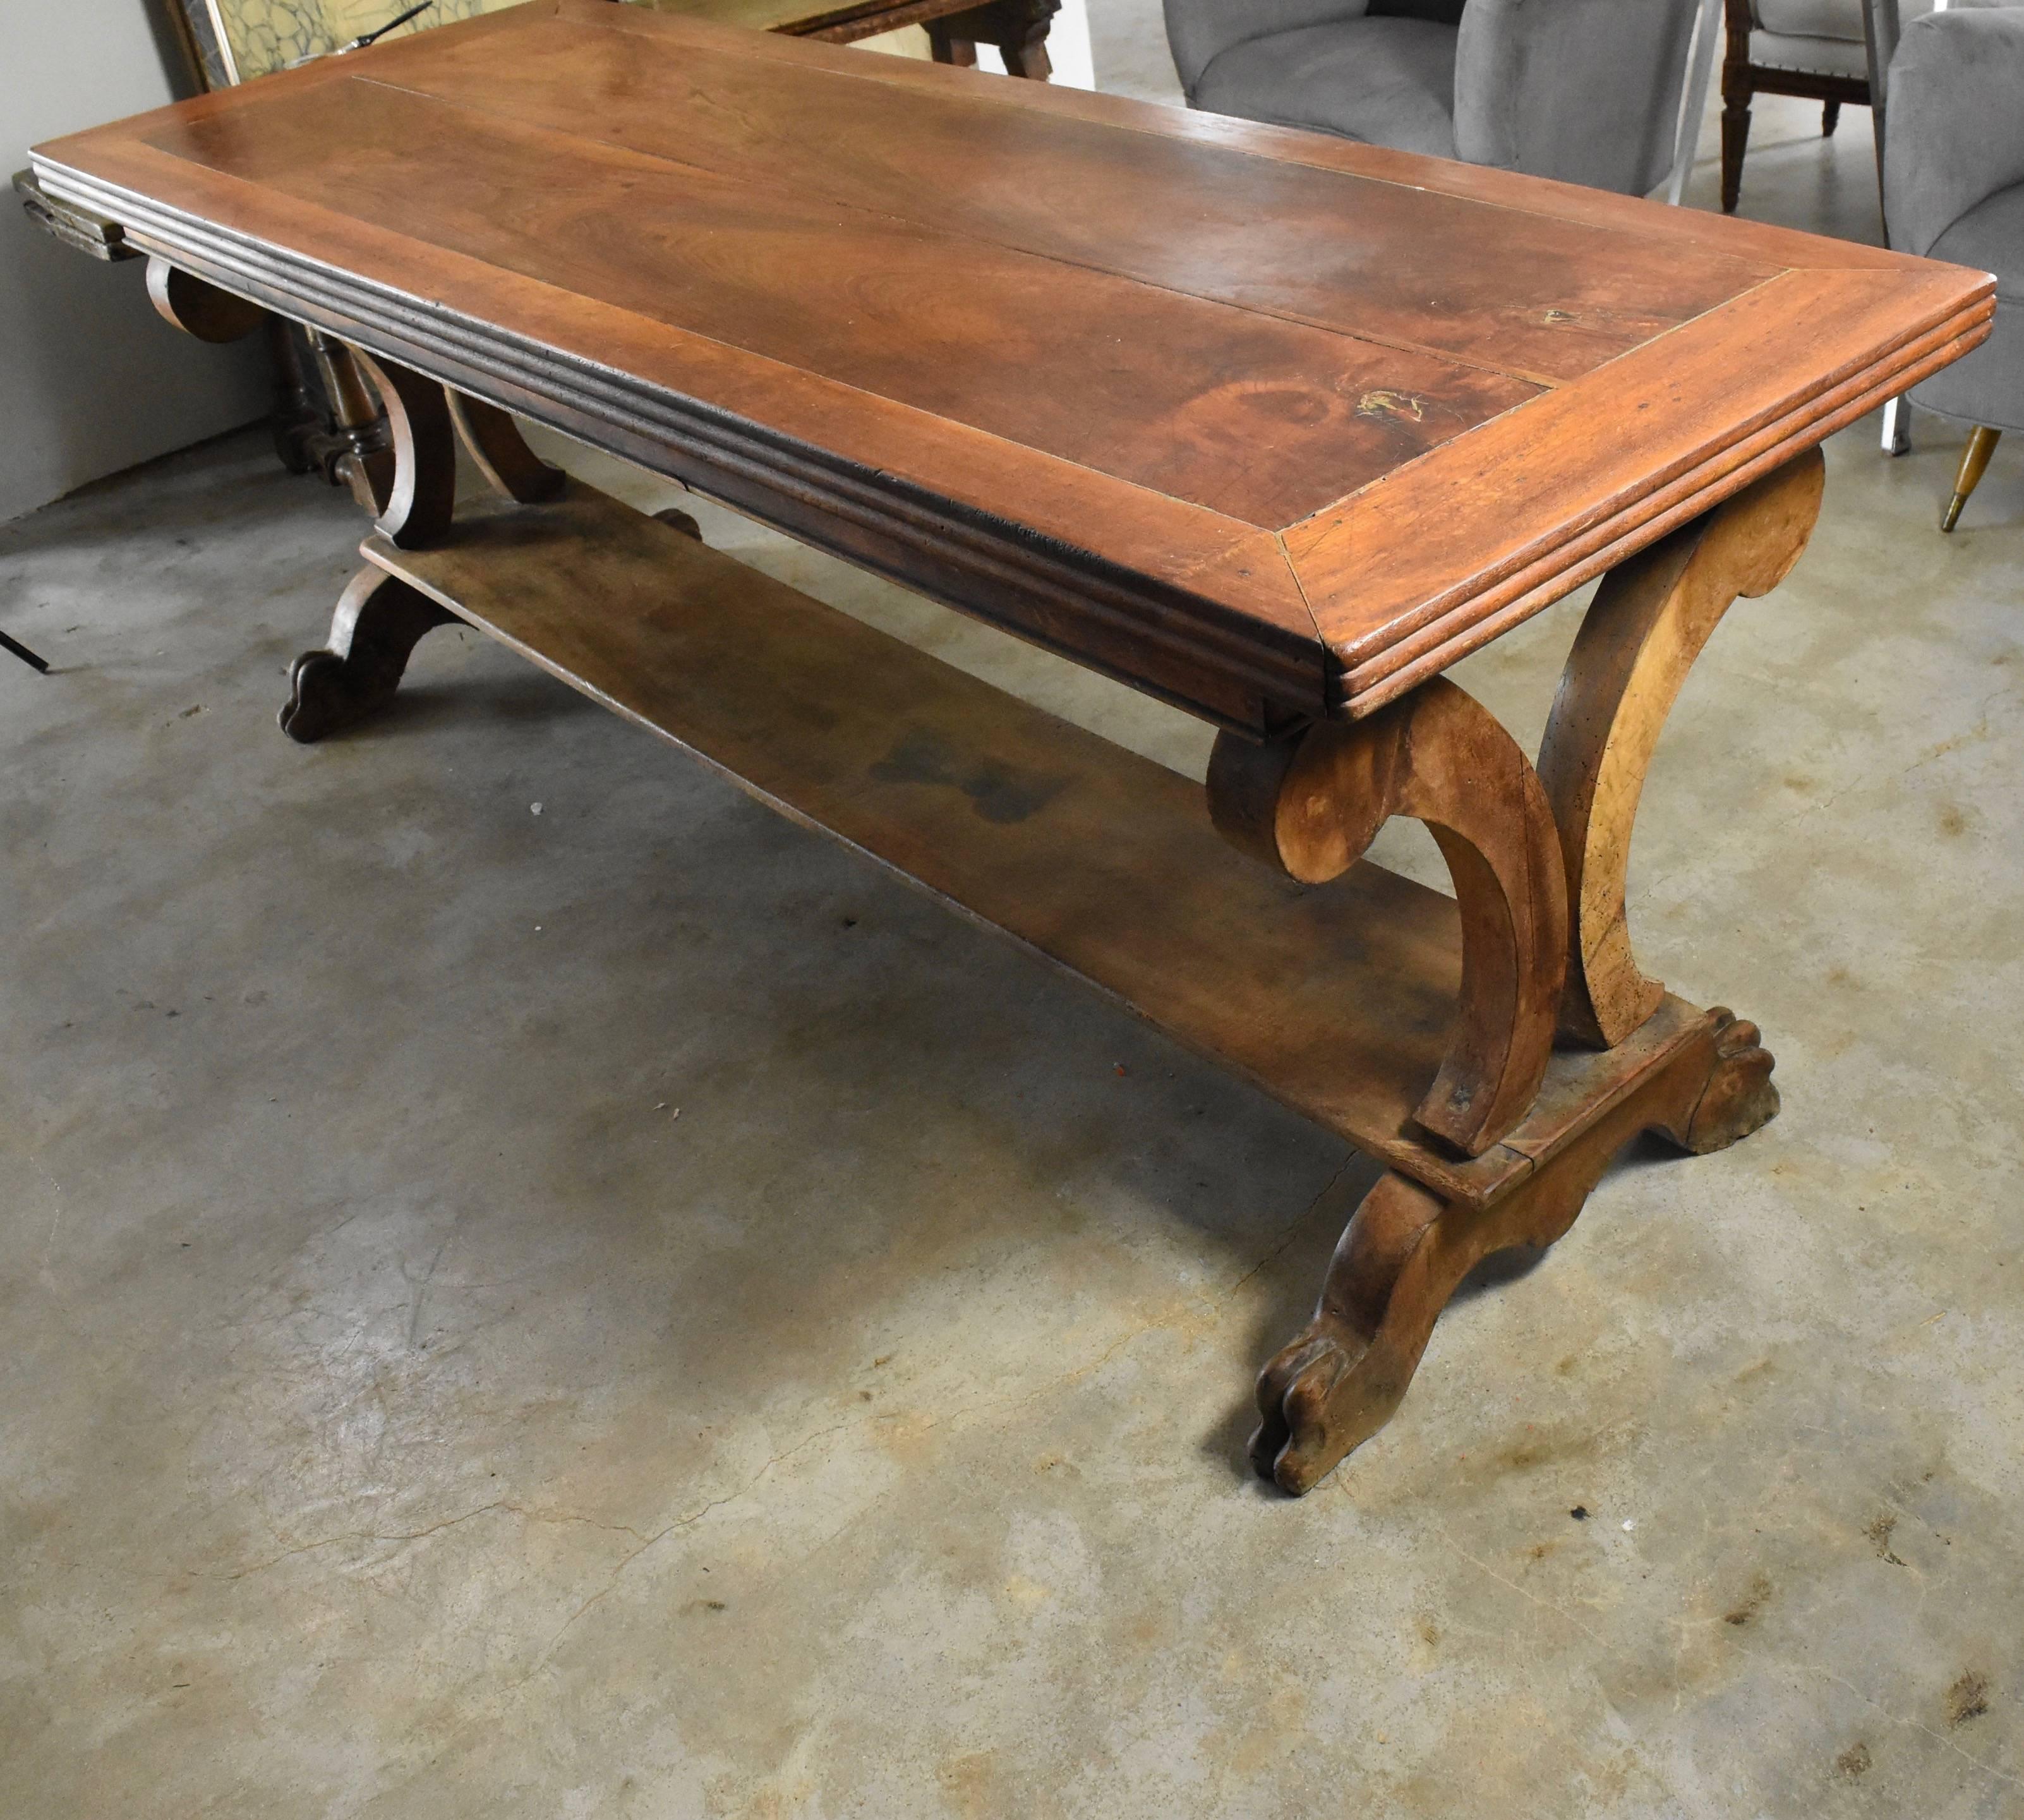 This is really a handsome walnut table from France. It makes the perfect desk or console that can float as it's finished all the way around. It features hand-carved lion claw feet and is very structurally stabile.
Skirt bottom to floor measures